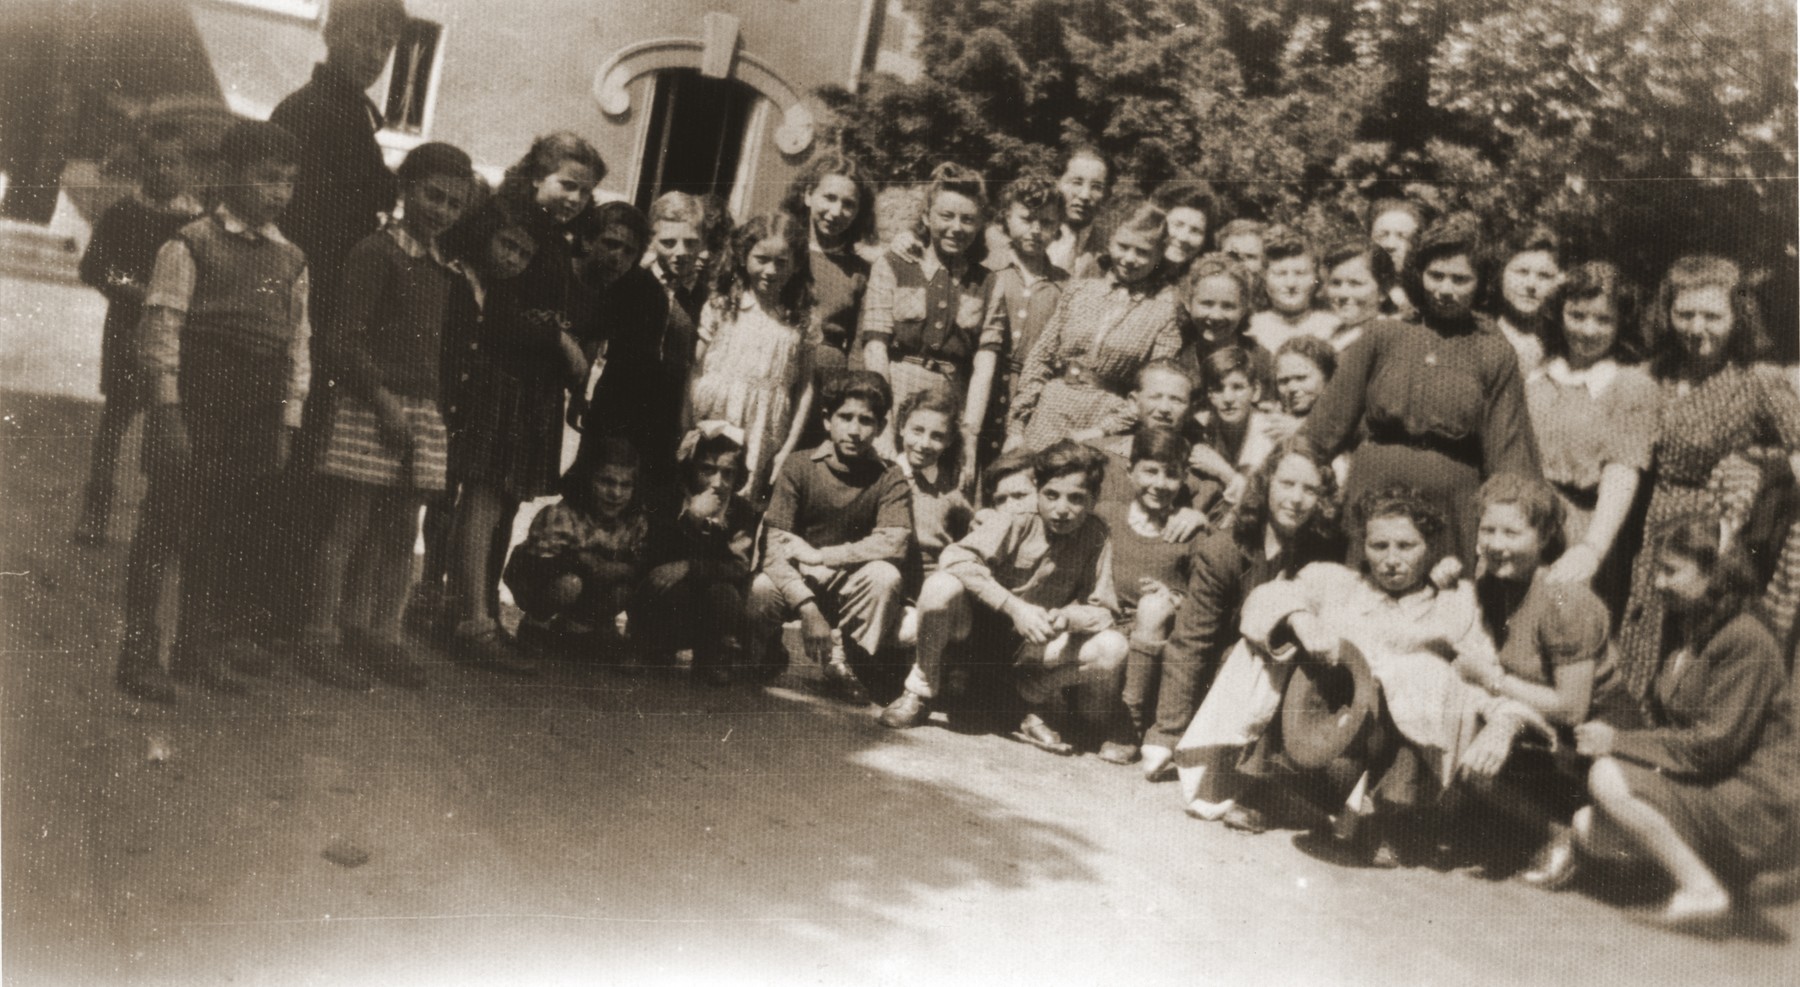 Group portrait of members of the orphans transport during their sojourn in France on their way to England.

Among those pictured are S. Lampert, Mermelstein, E. Zelovic, Vermes, Markovits, Weinberger, M. Lampert, W. Zelovic, Weiss, Davidovic, Lebovic, Slomovic, Birnbaum, Zelikovic and Bohm.